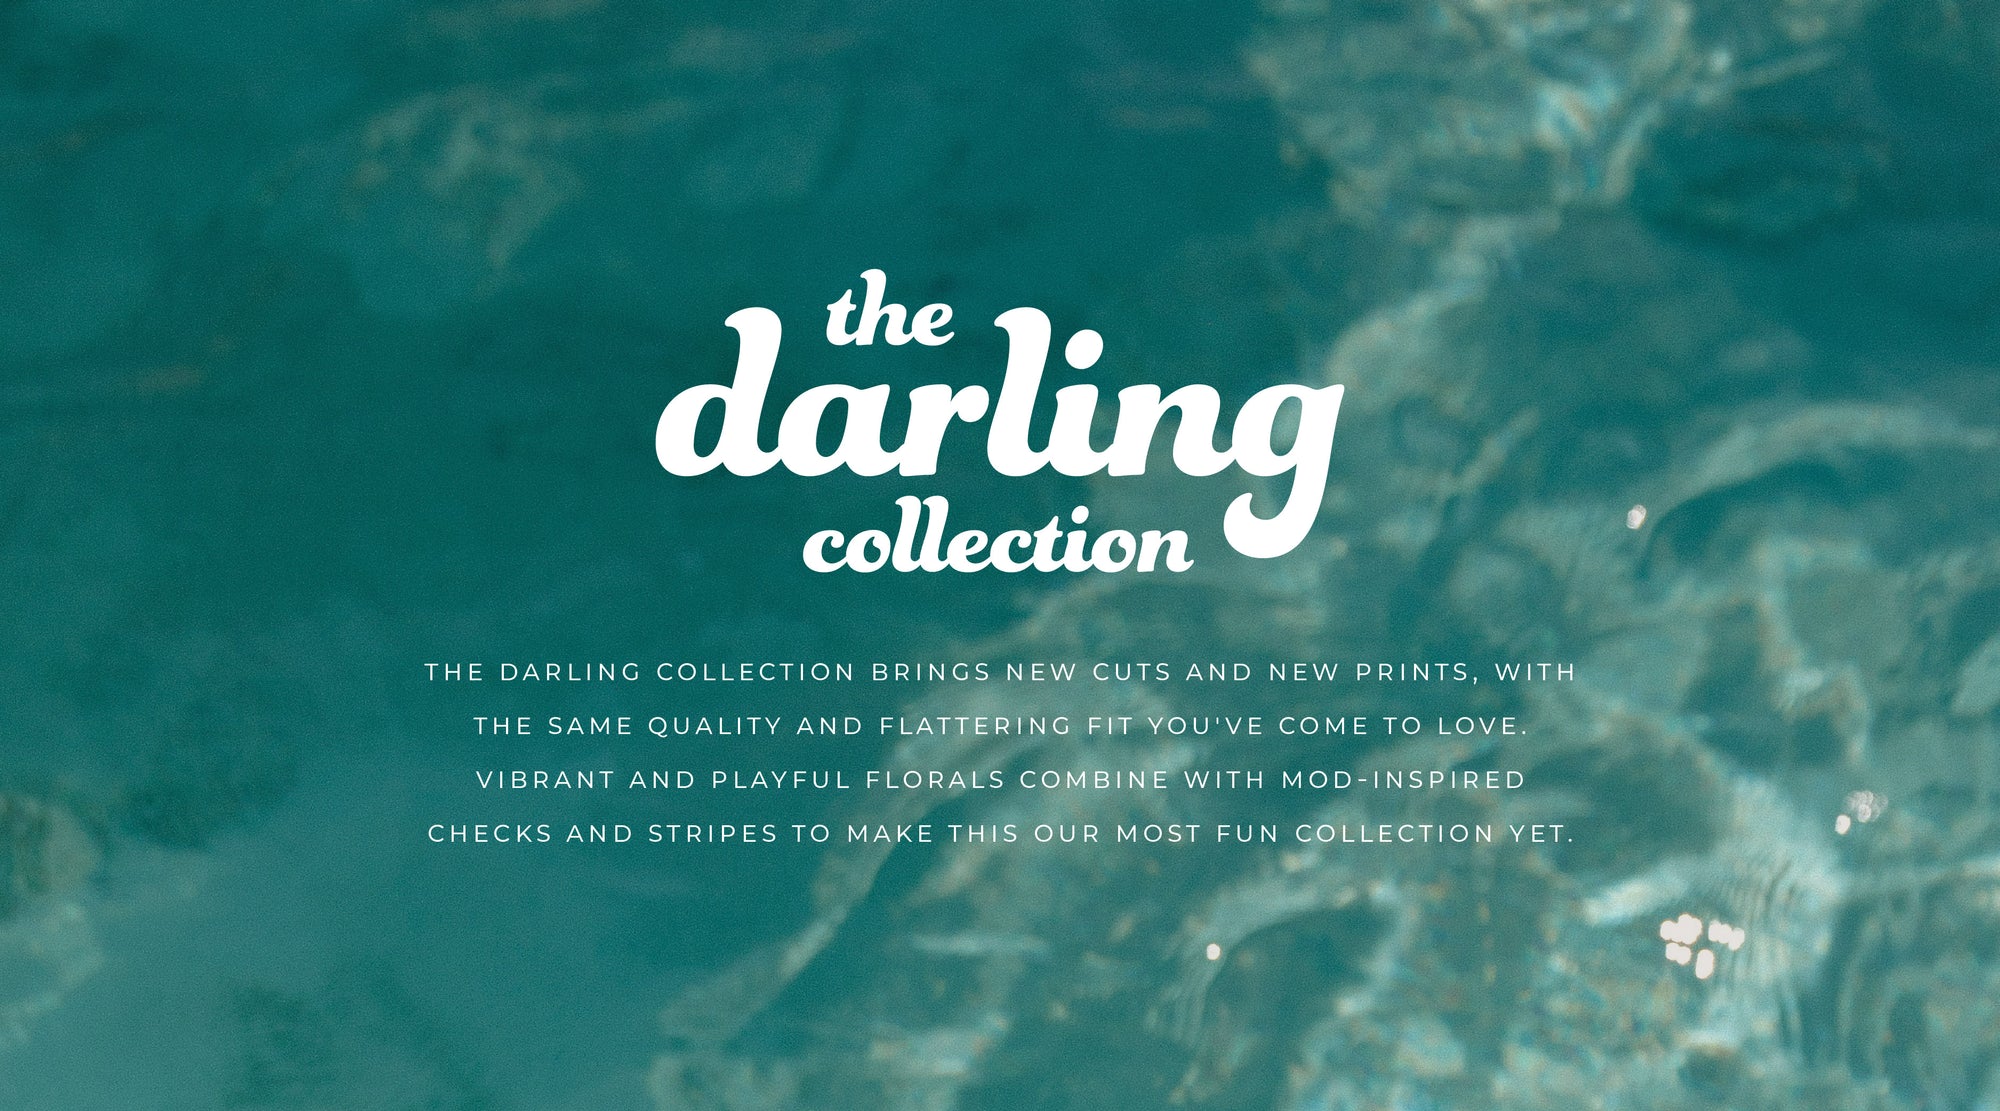 The Darling Collection